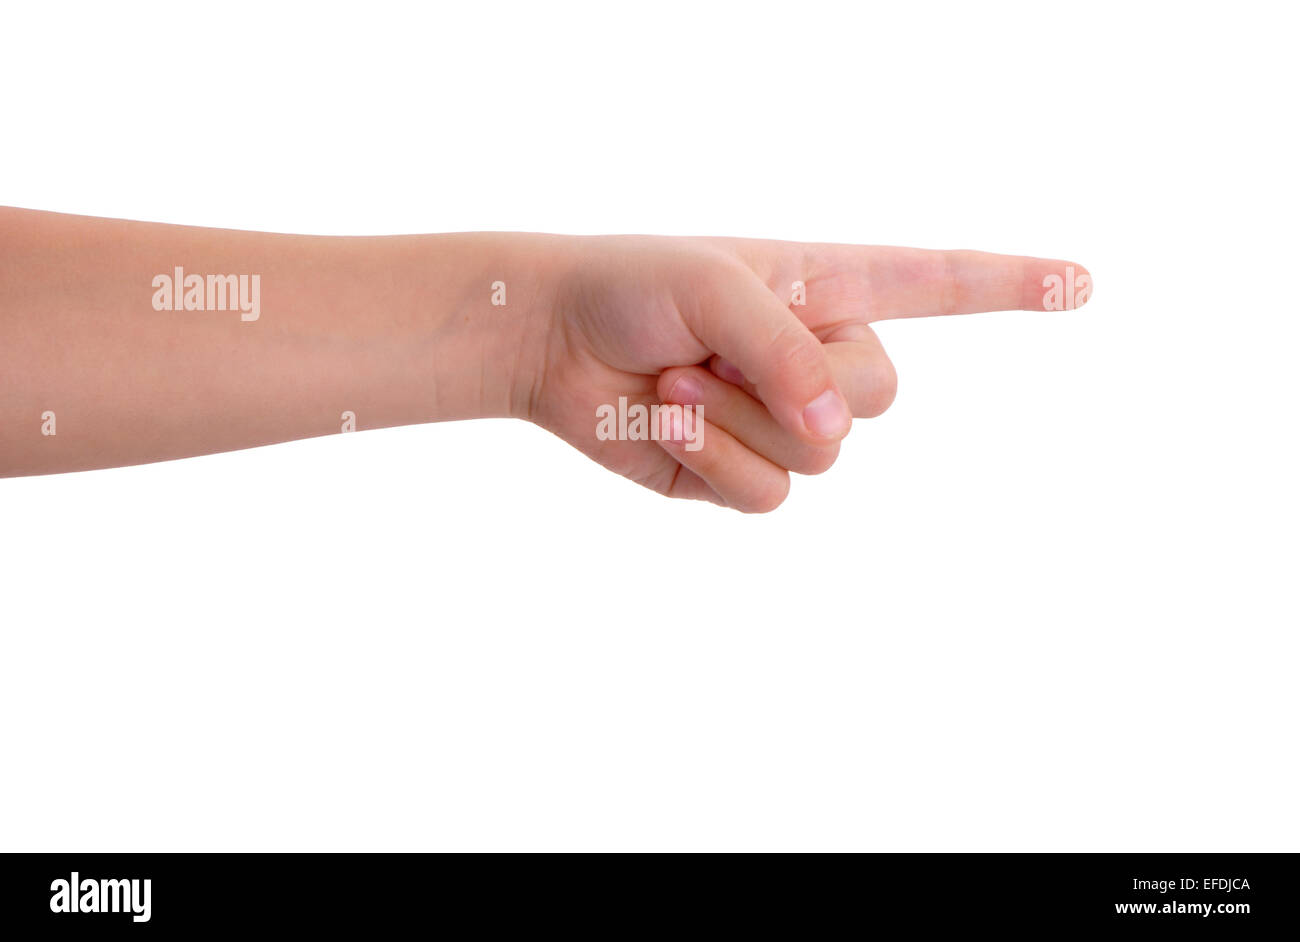 Baby index finger pointing isolated over white background Stock Photo